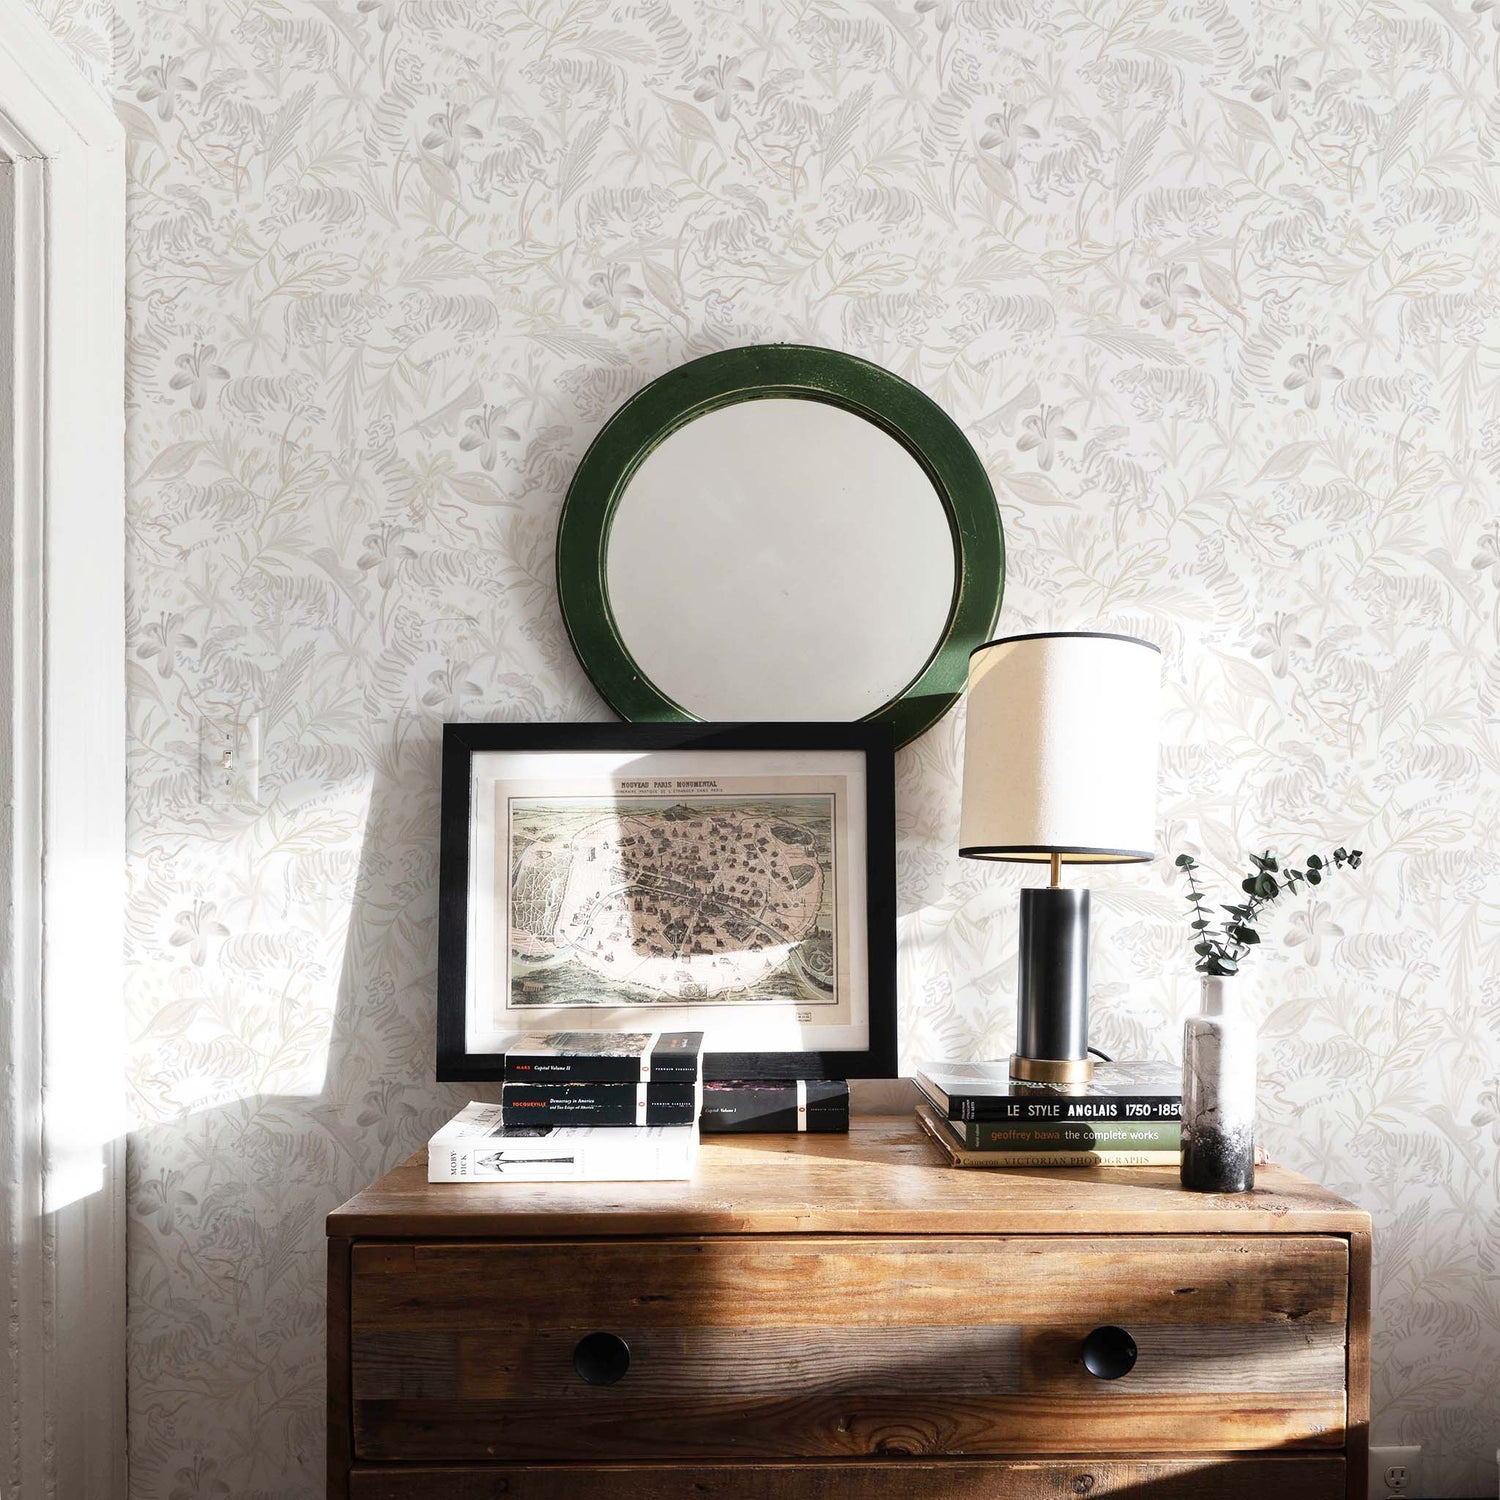 Corner styled with Beige Chinoiserie Tiger Printed Wallpaper by wooden dresser with black and white lamp on top of stacked books next to picture frame below circular green mirror